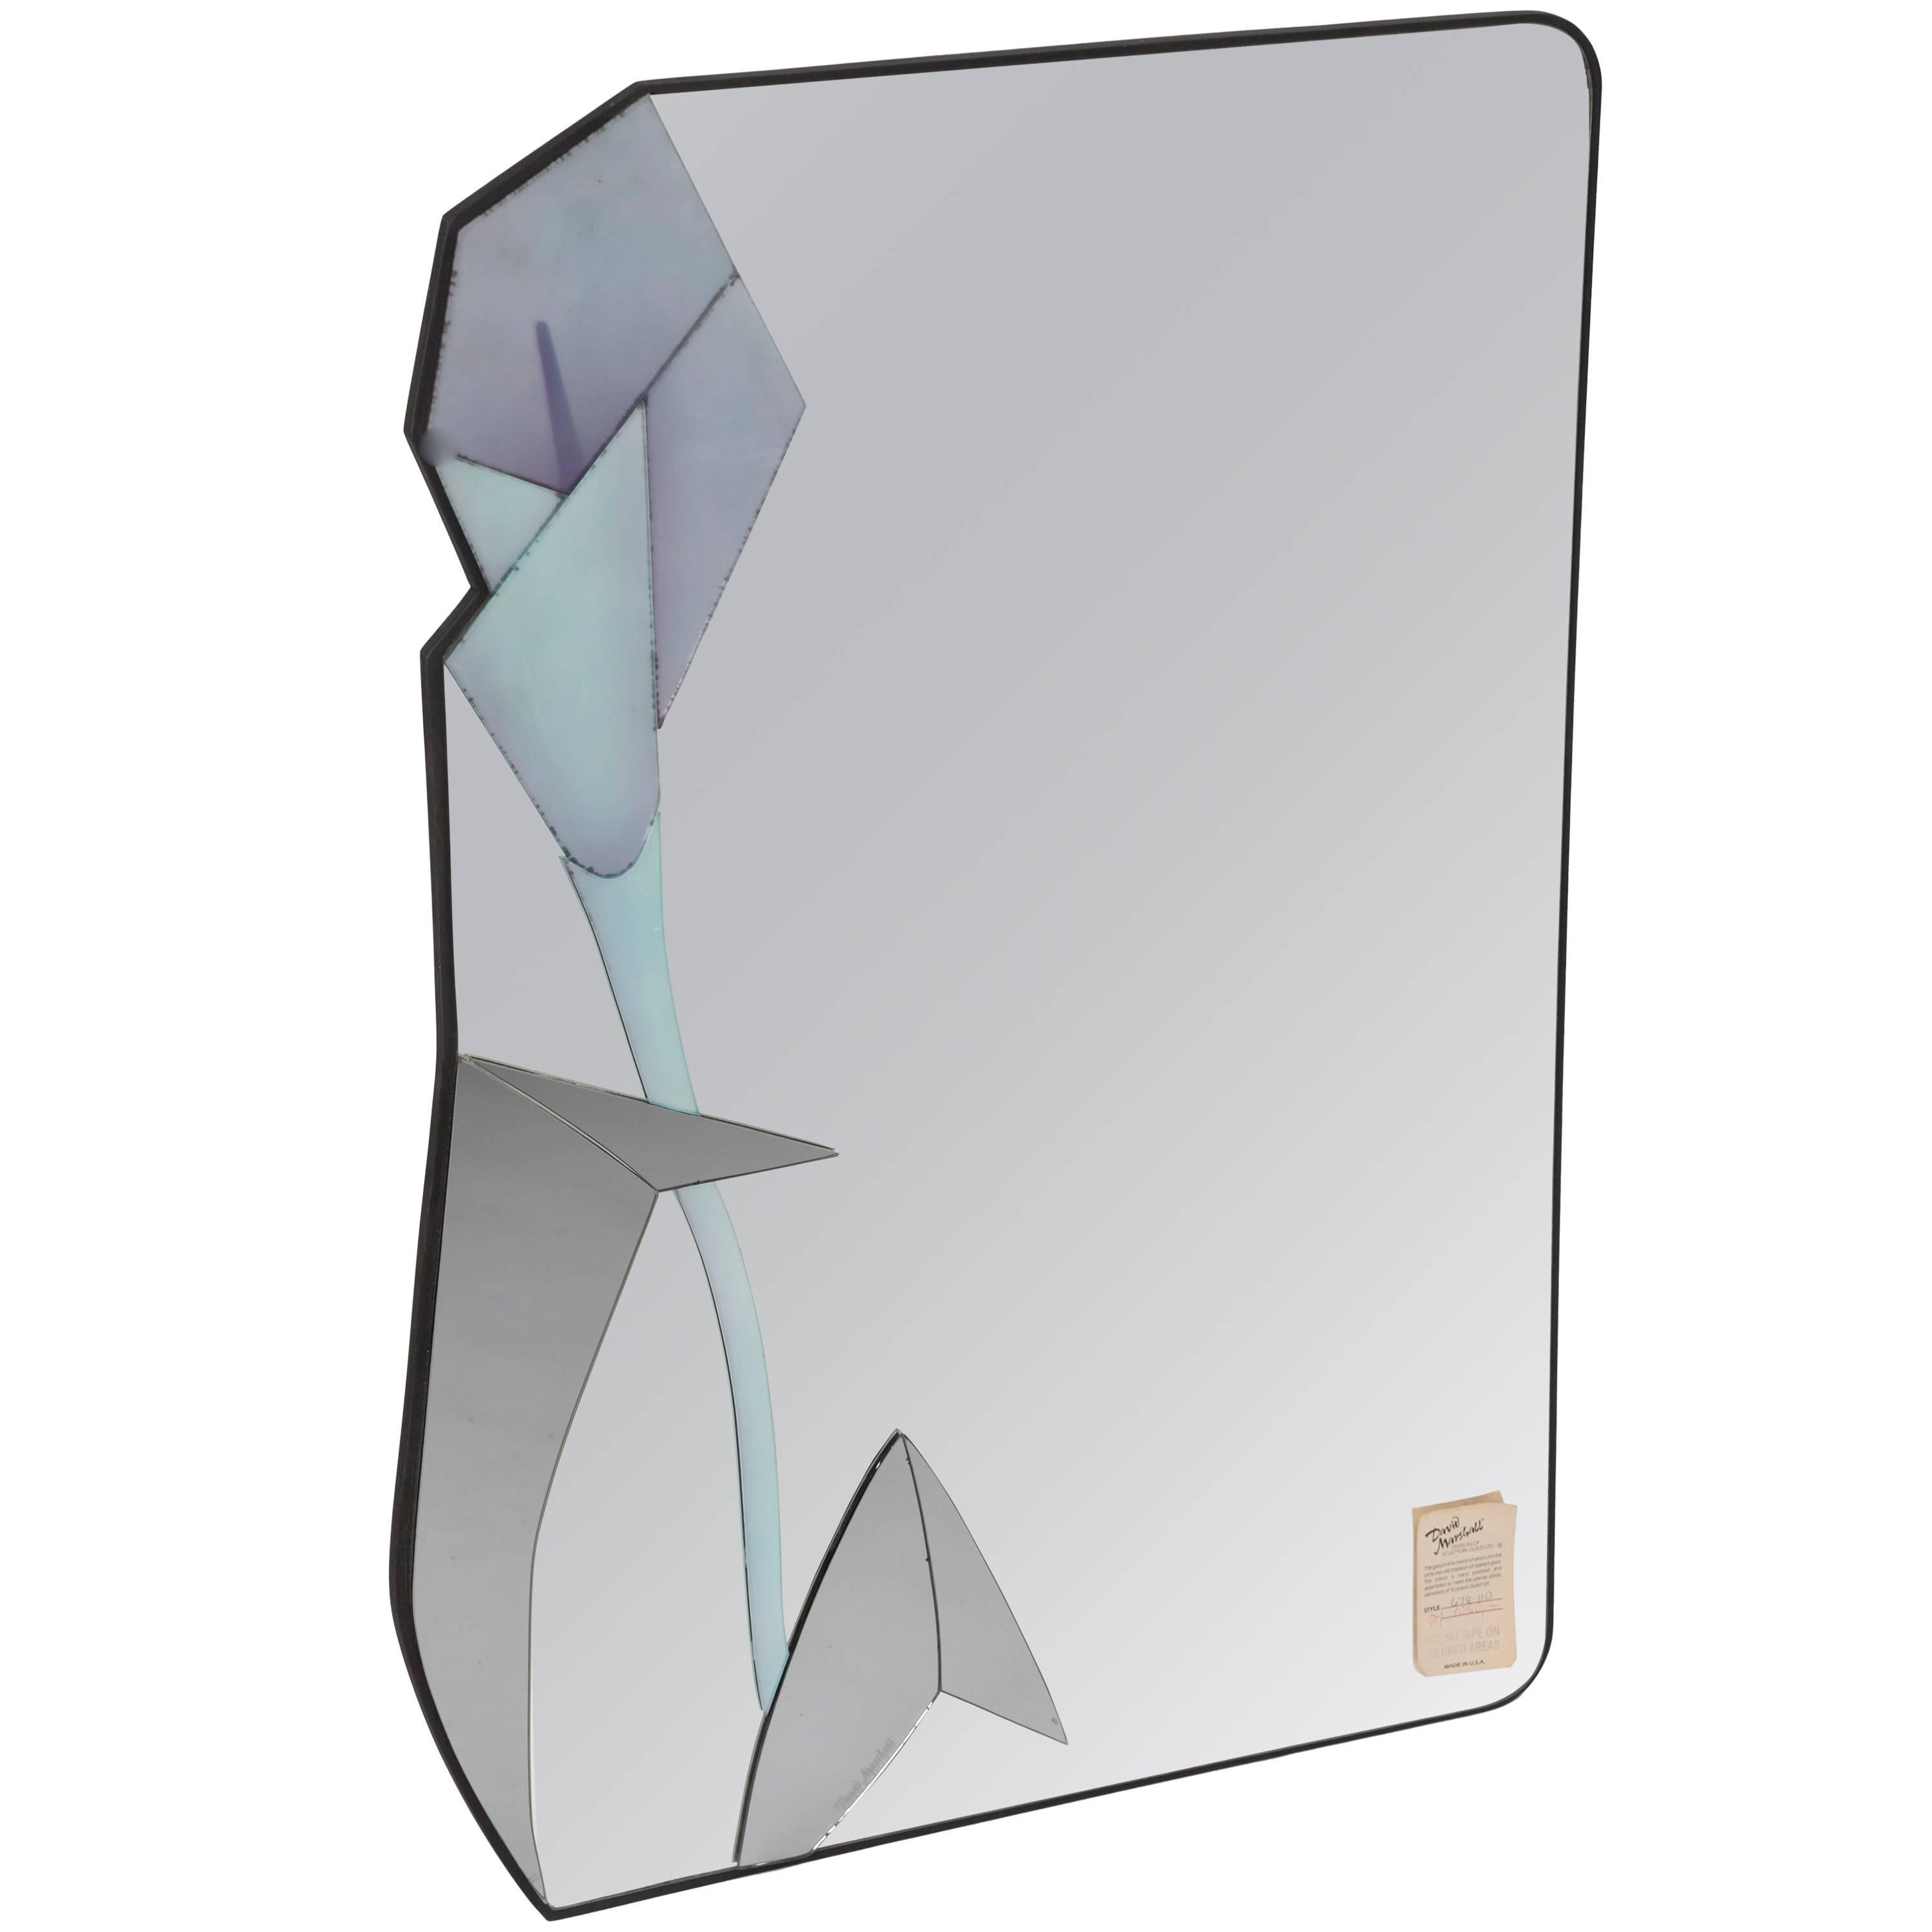 Asymmetric Wall Mirror with several different layers created by David Marshall  For Sale